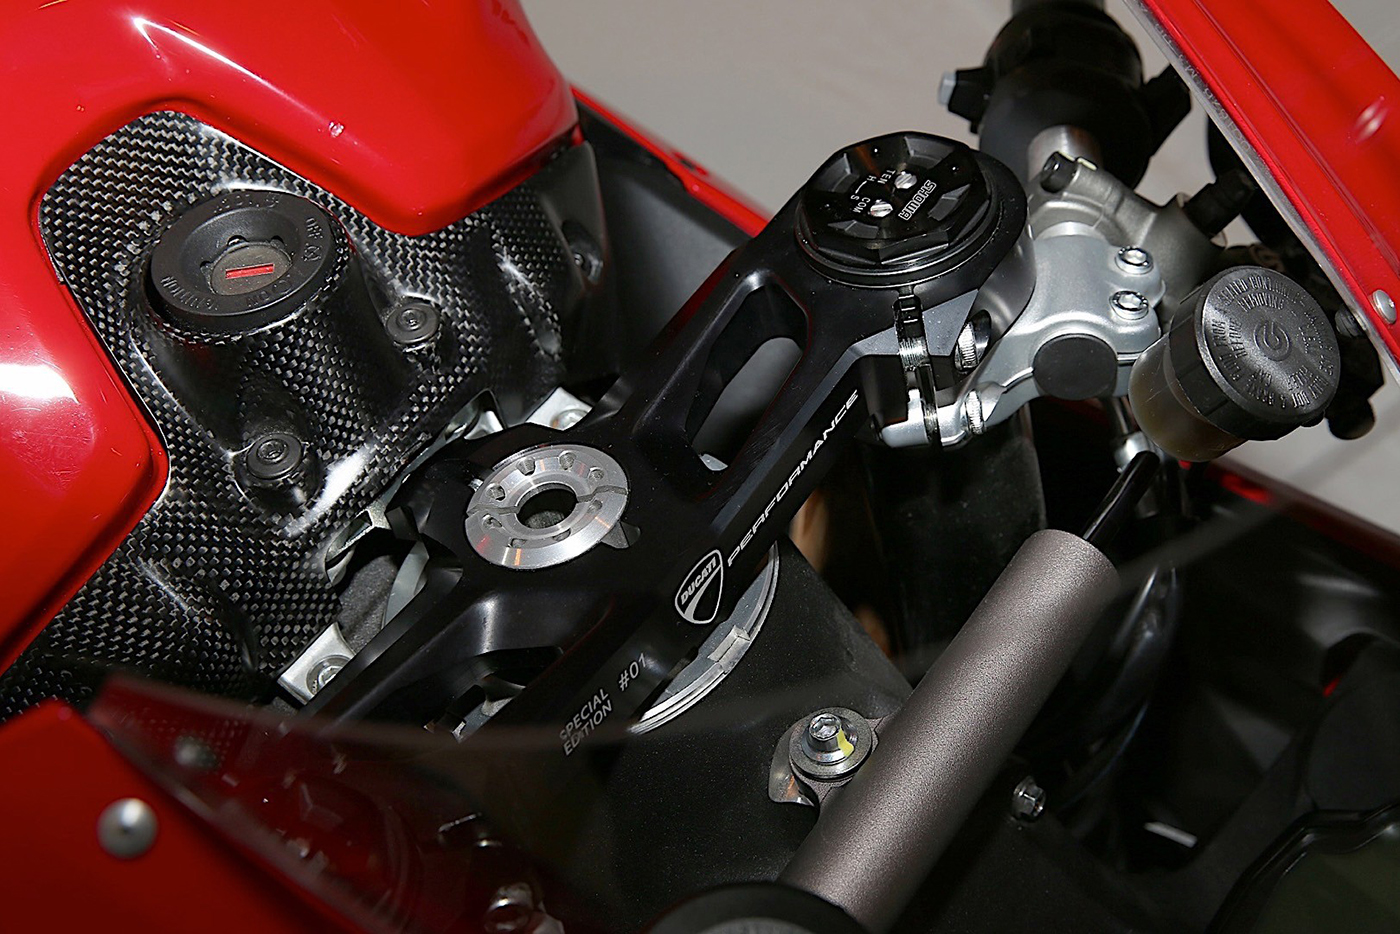 special-edition-ducati-959-panigale-announced-for-the-uk-2.jpg